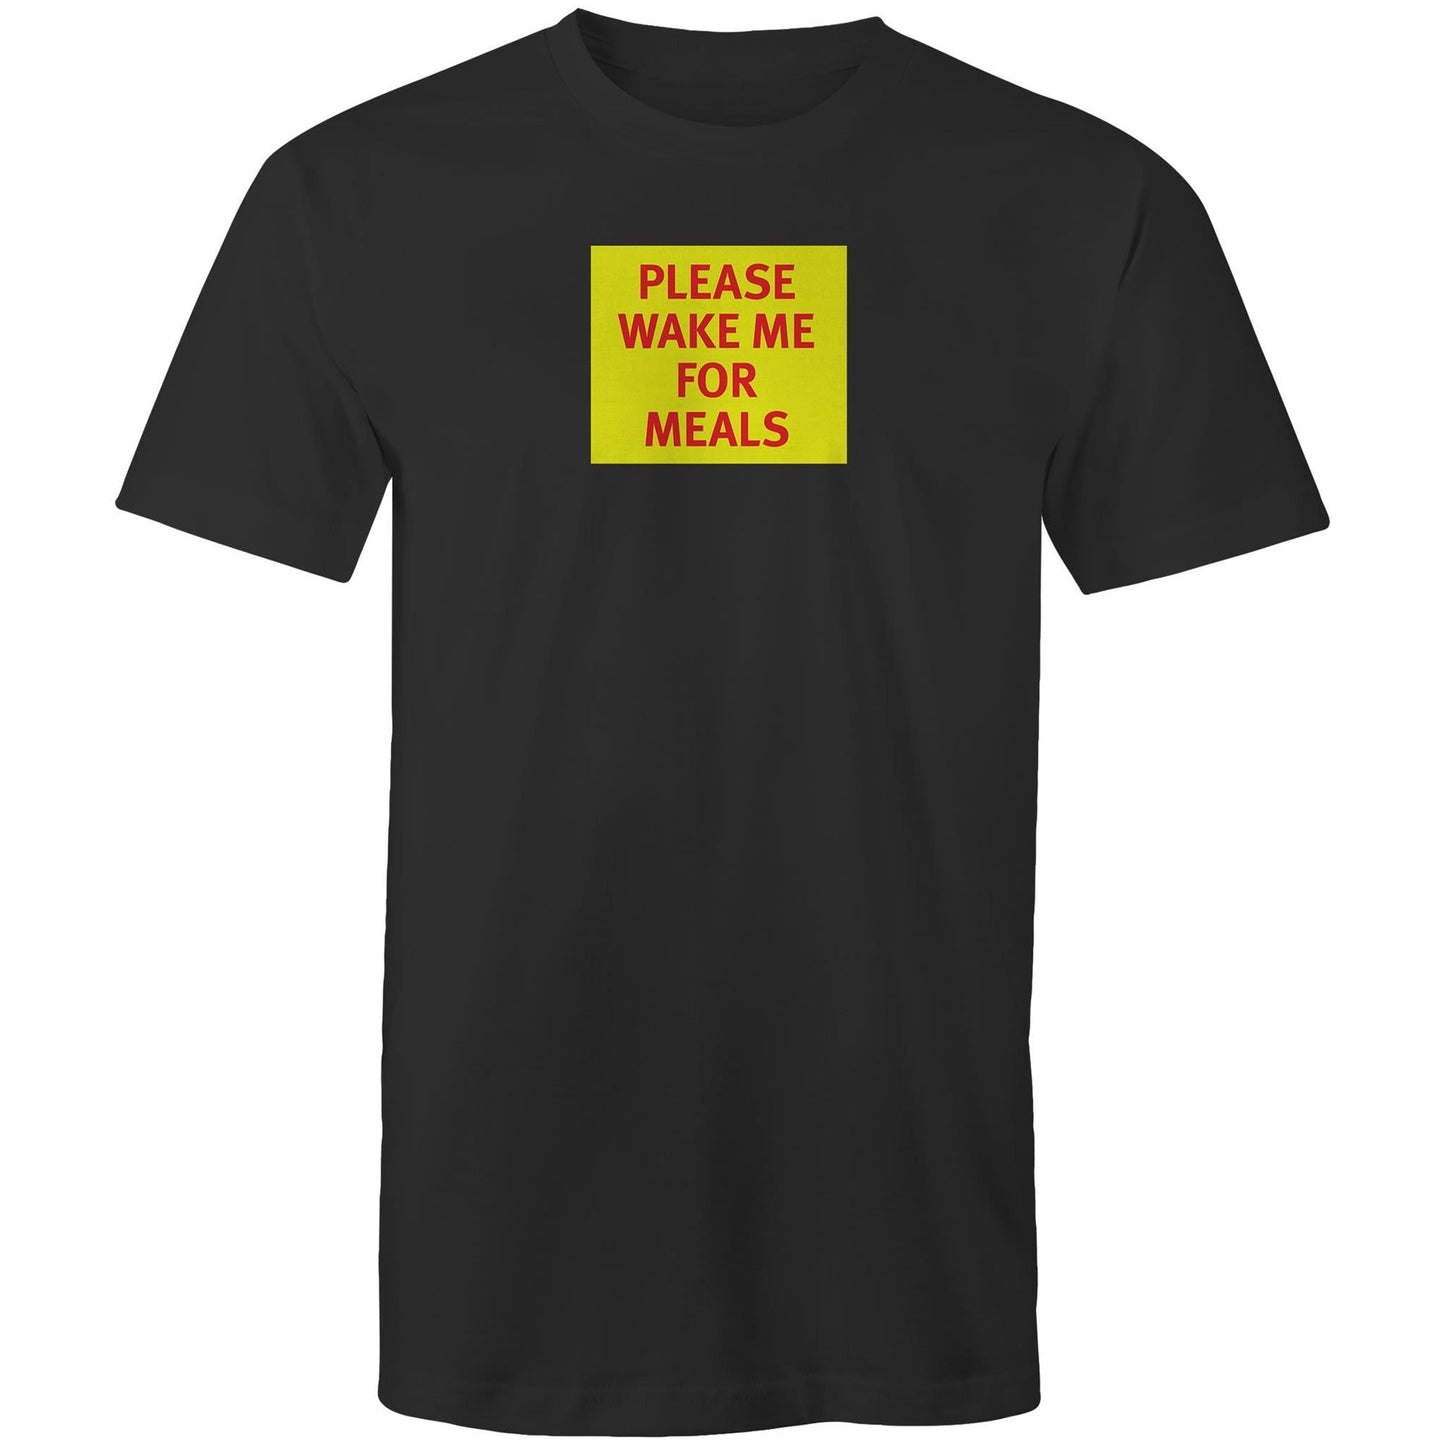 Please Wake Me for Meals T Shirts for Men (Unisex)